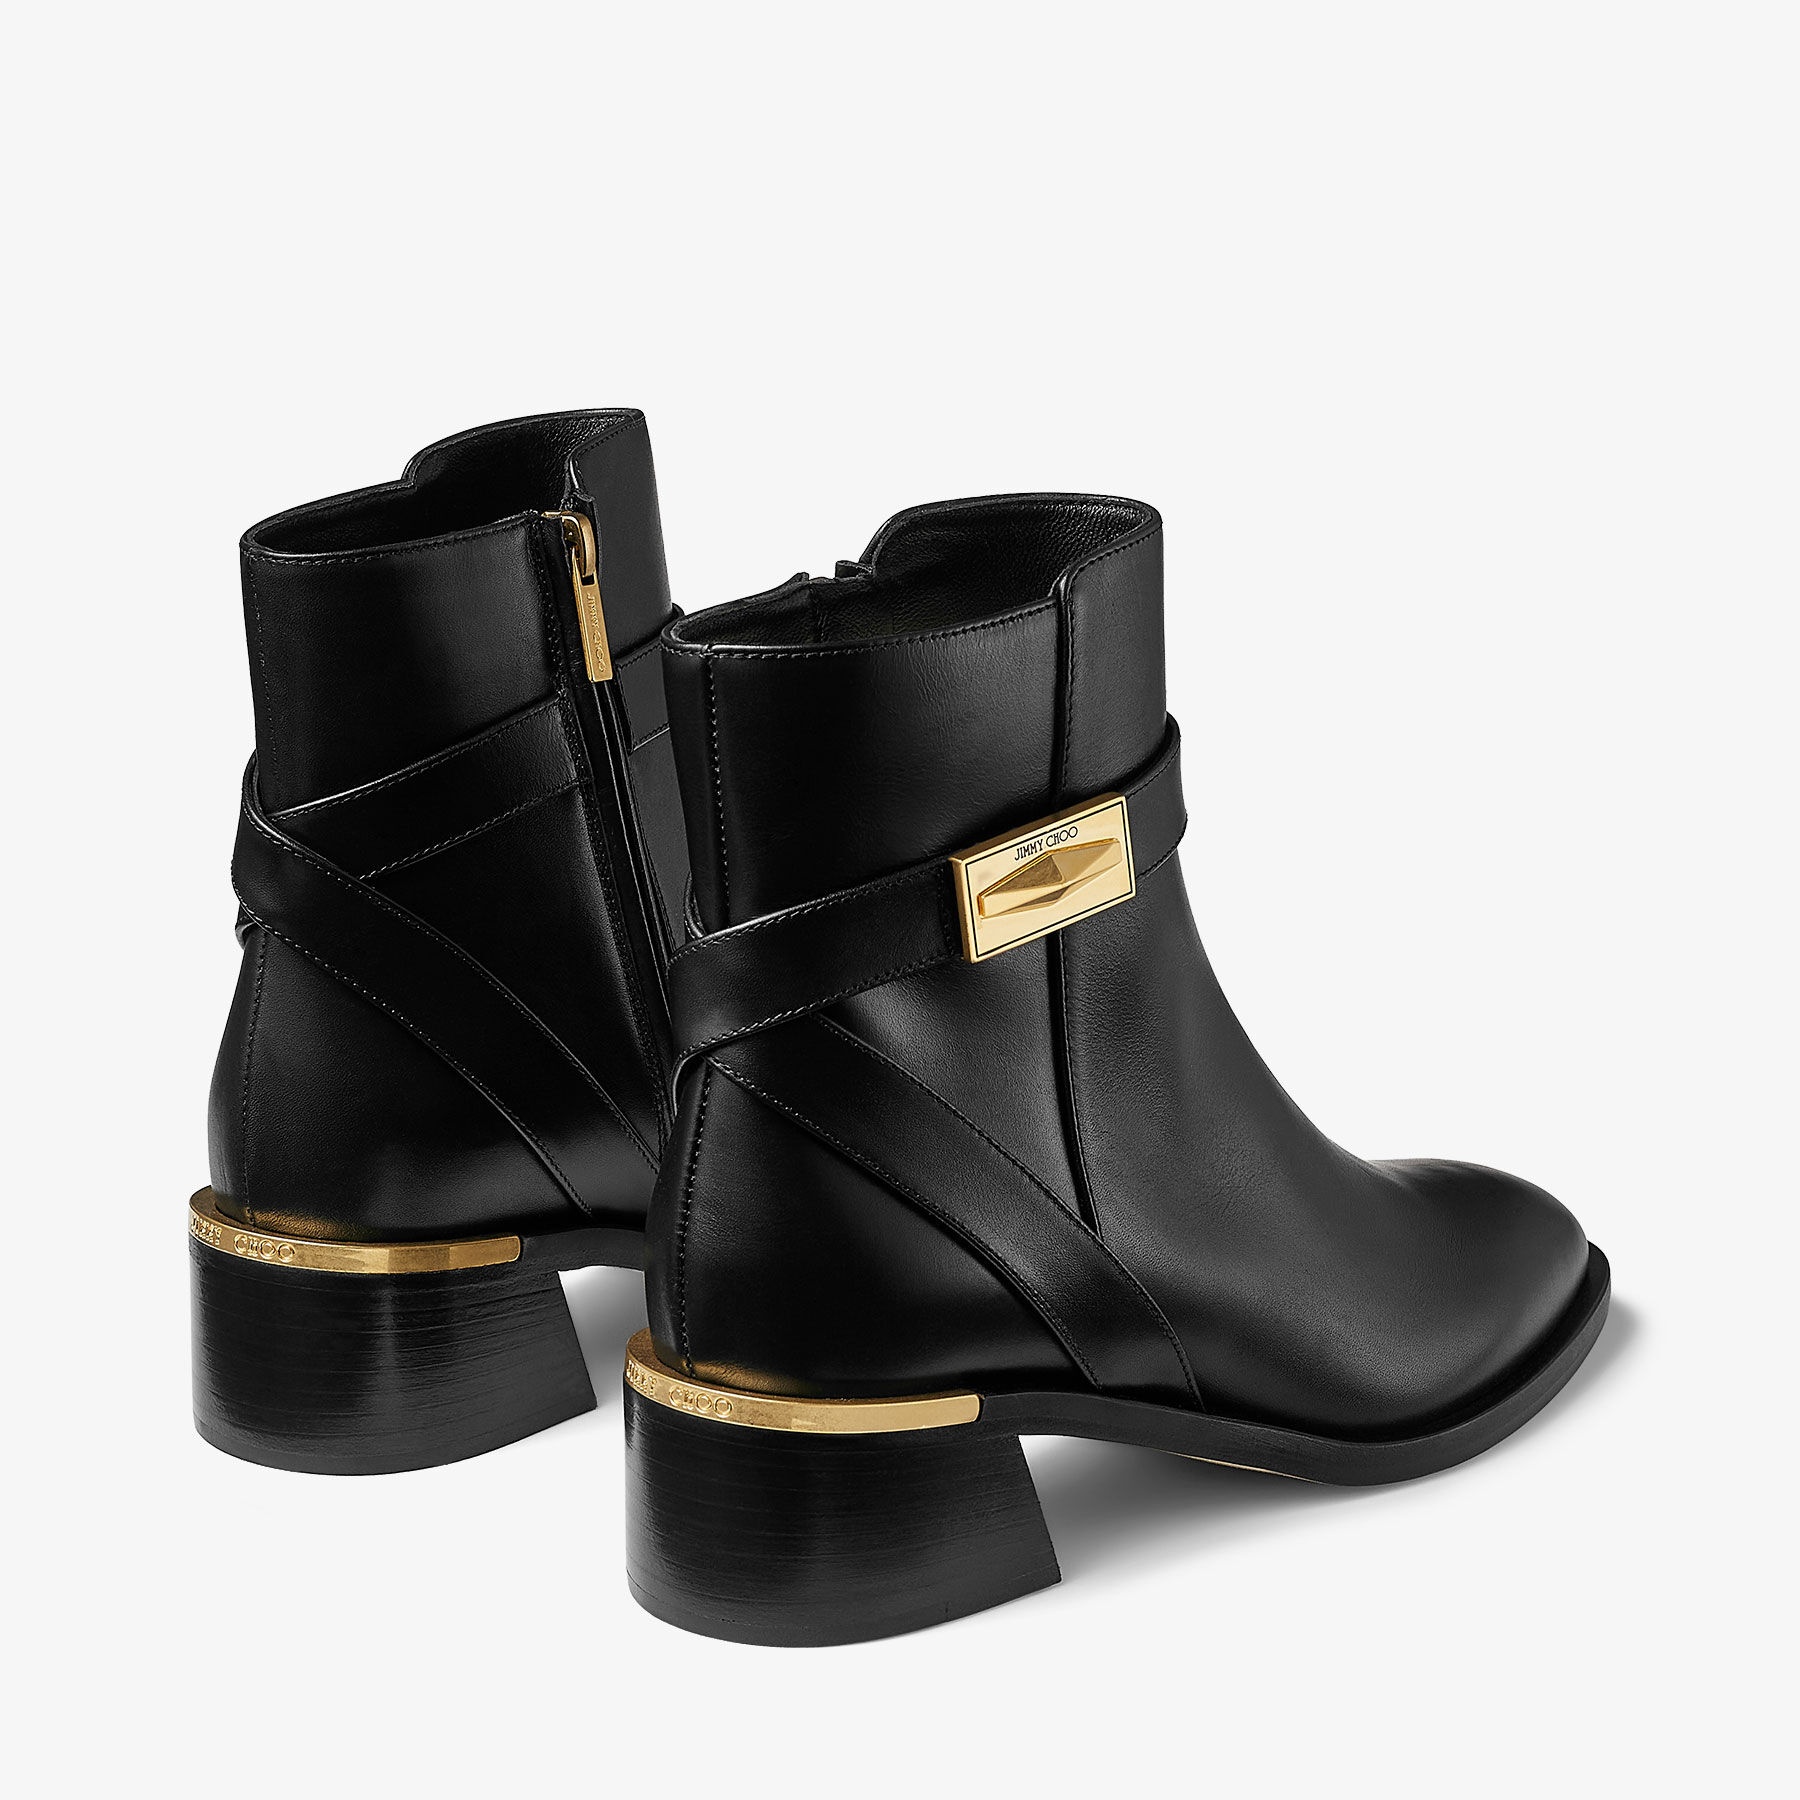 Nell 85 leather ankle boots